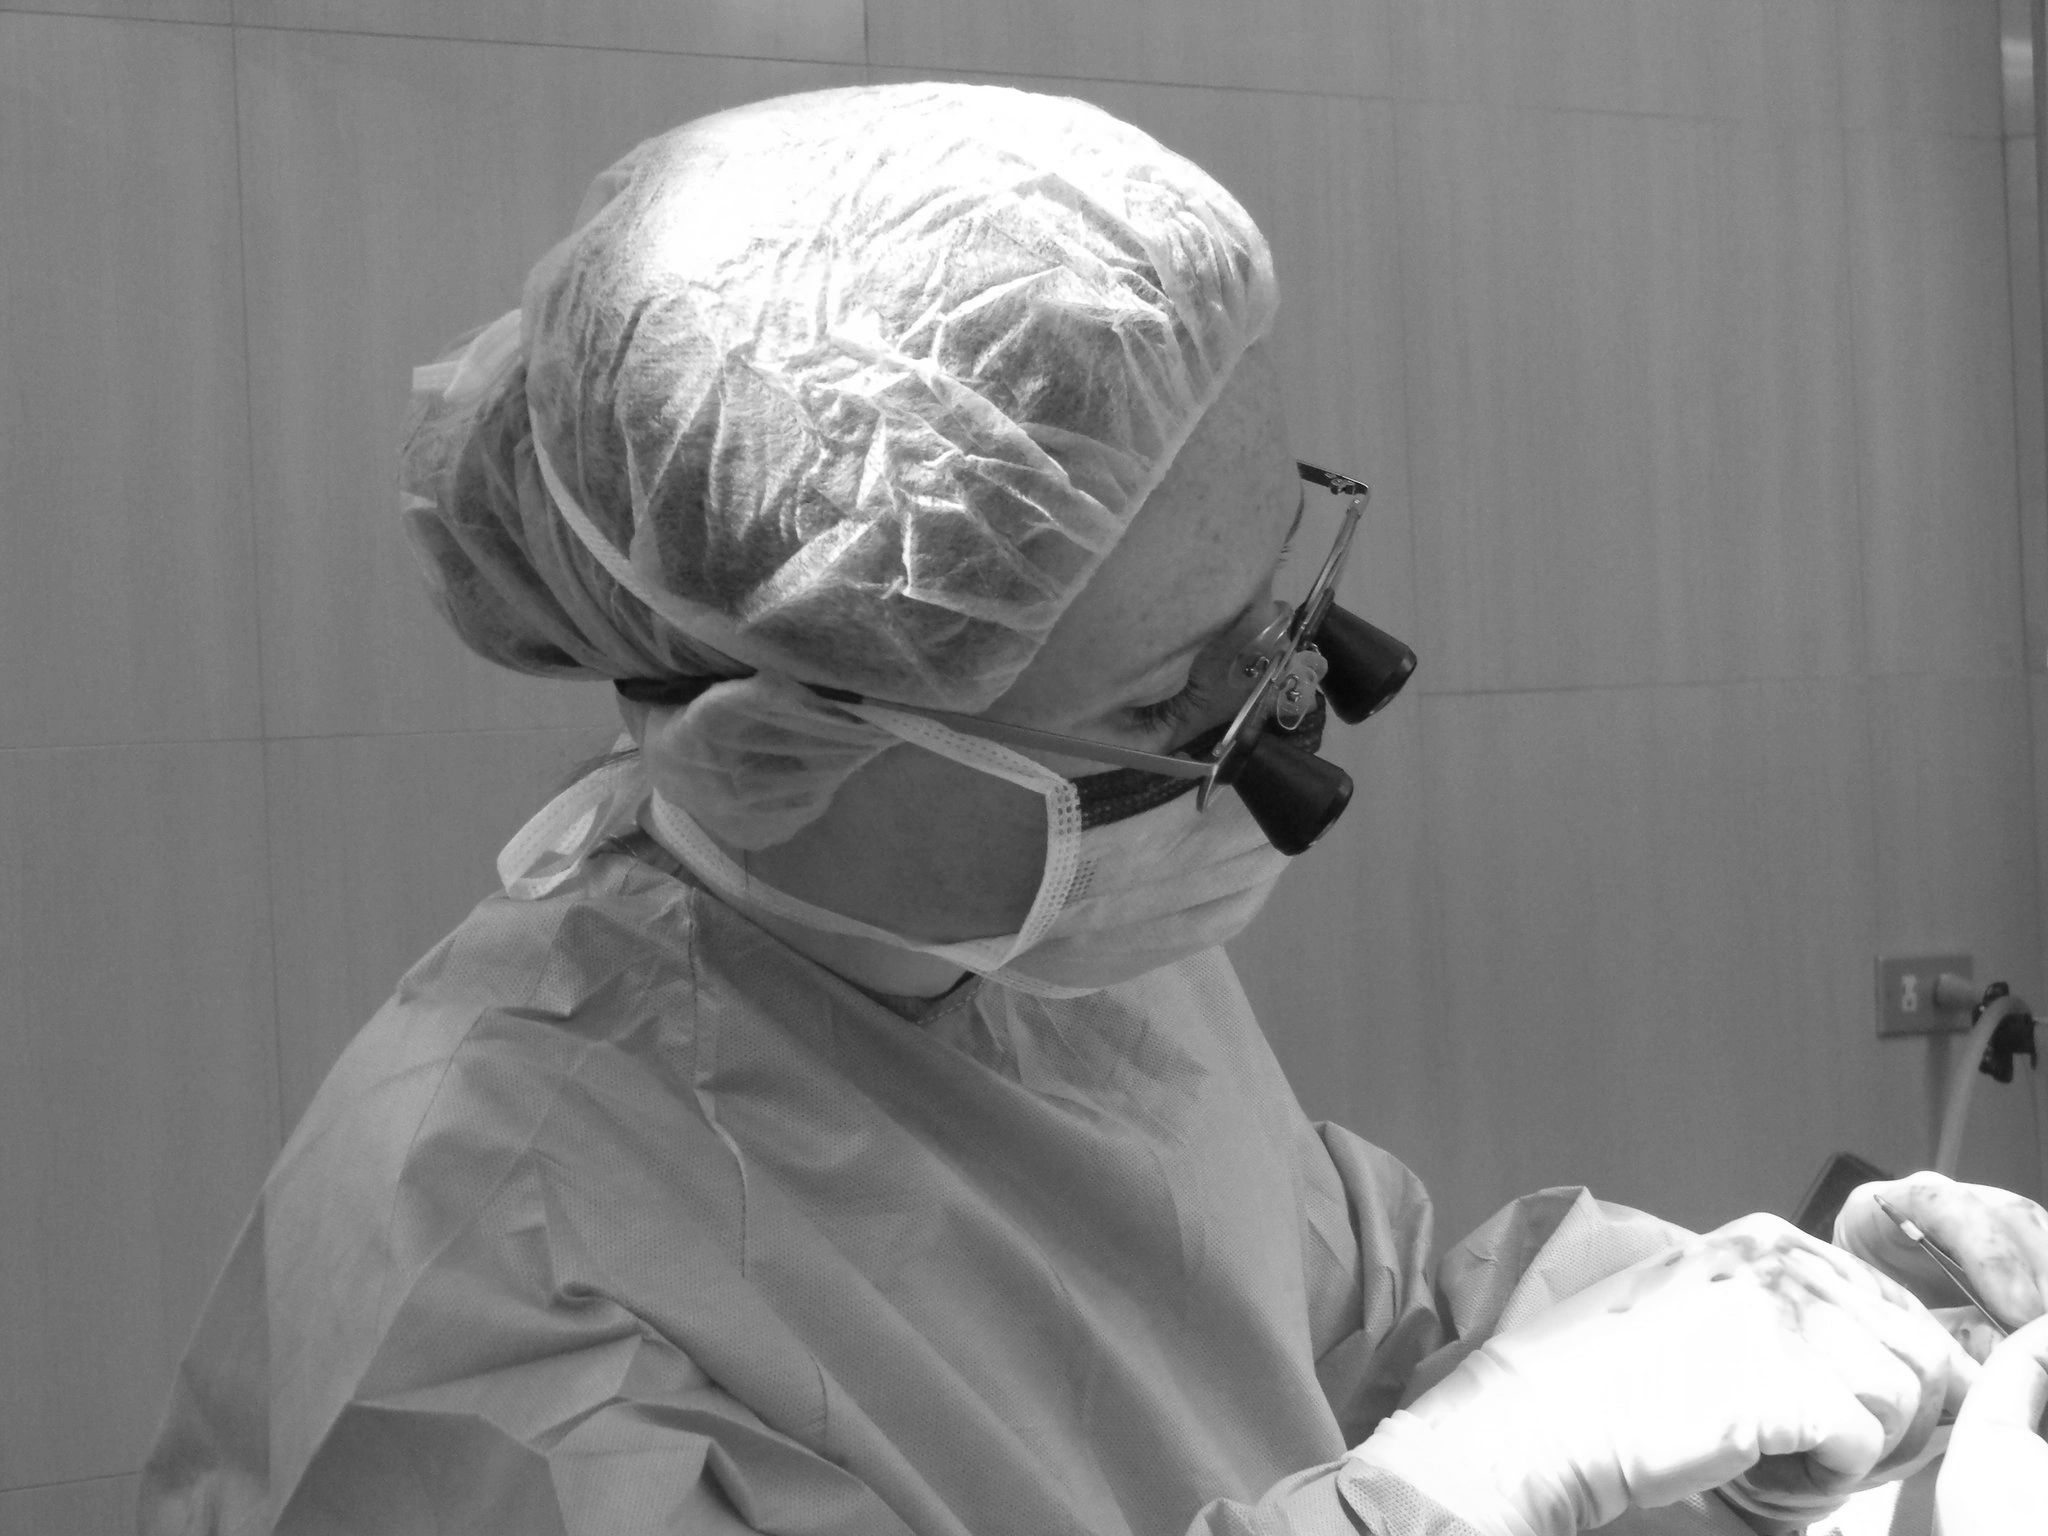 Dr.McKee, hand surgeon, works during a surgery.